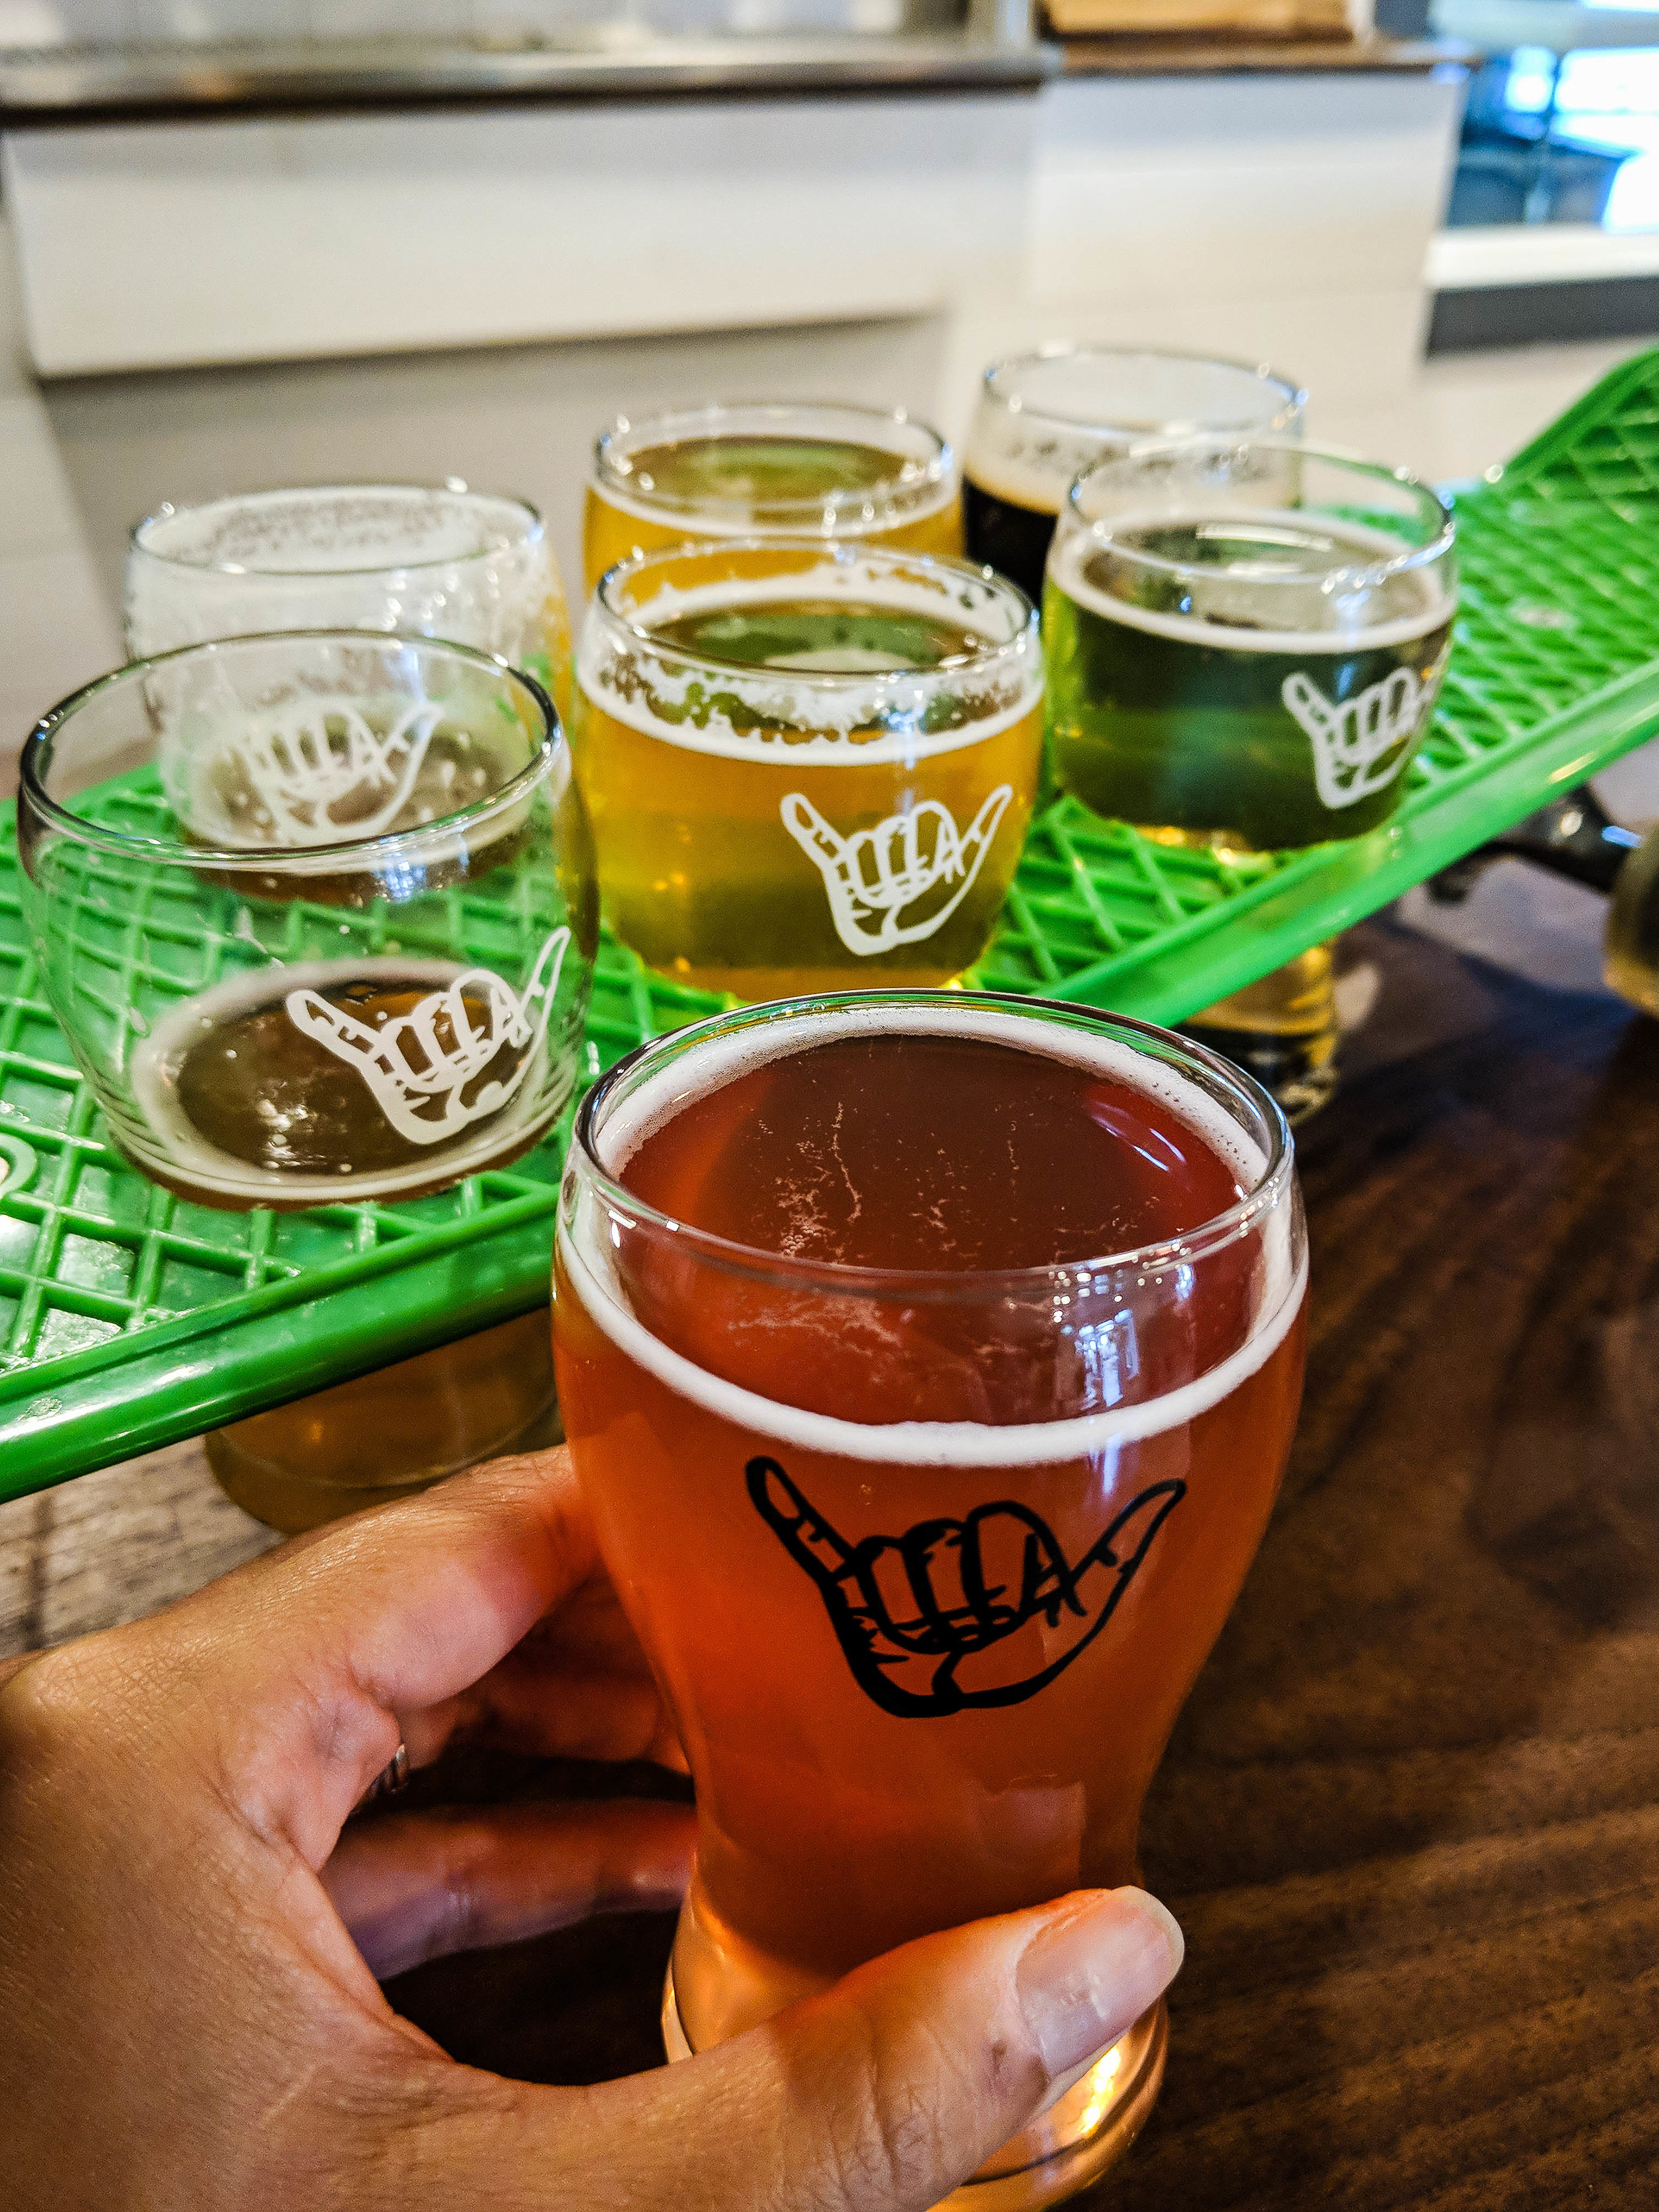 Prince Eddy's Brewery - Things to do in Prince Edward County